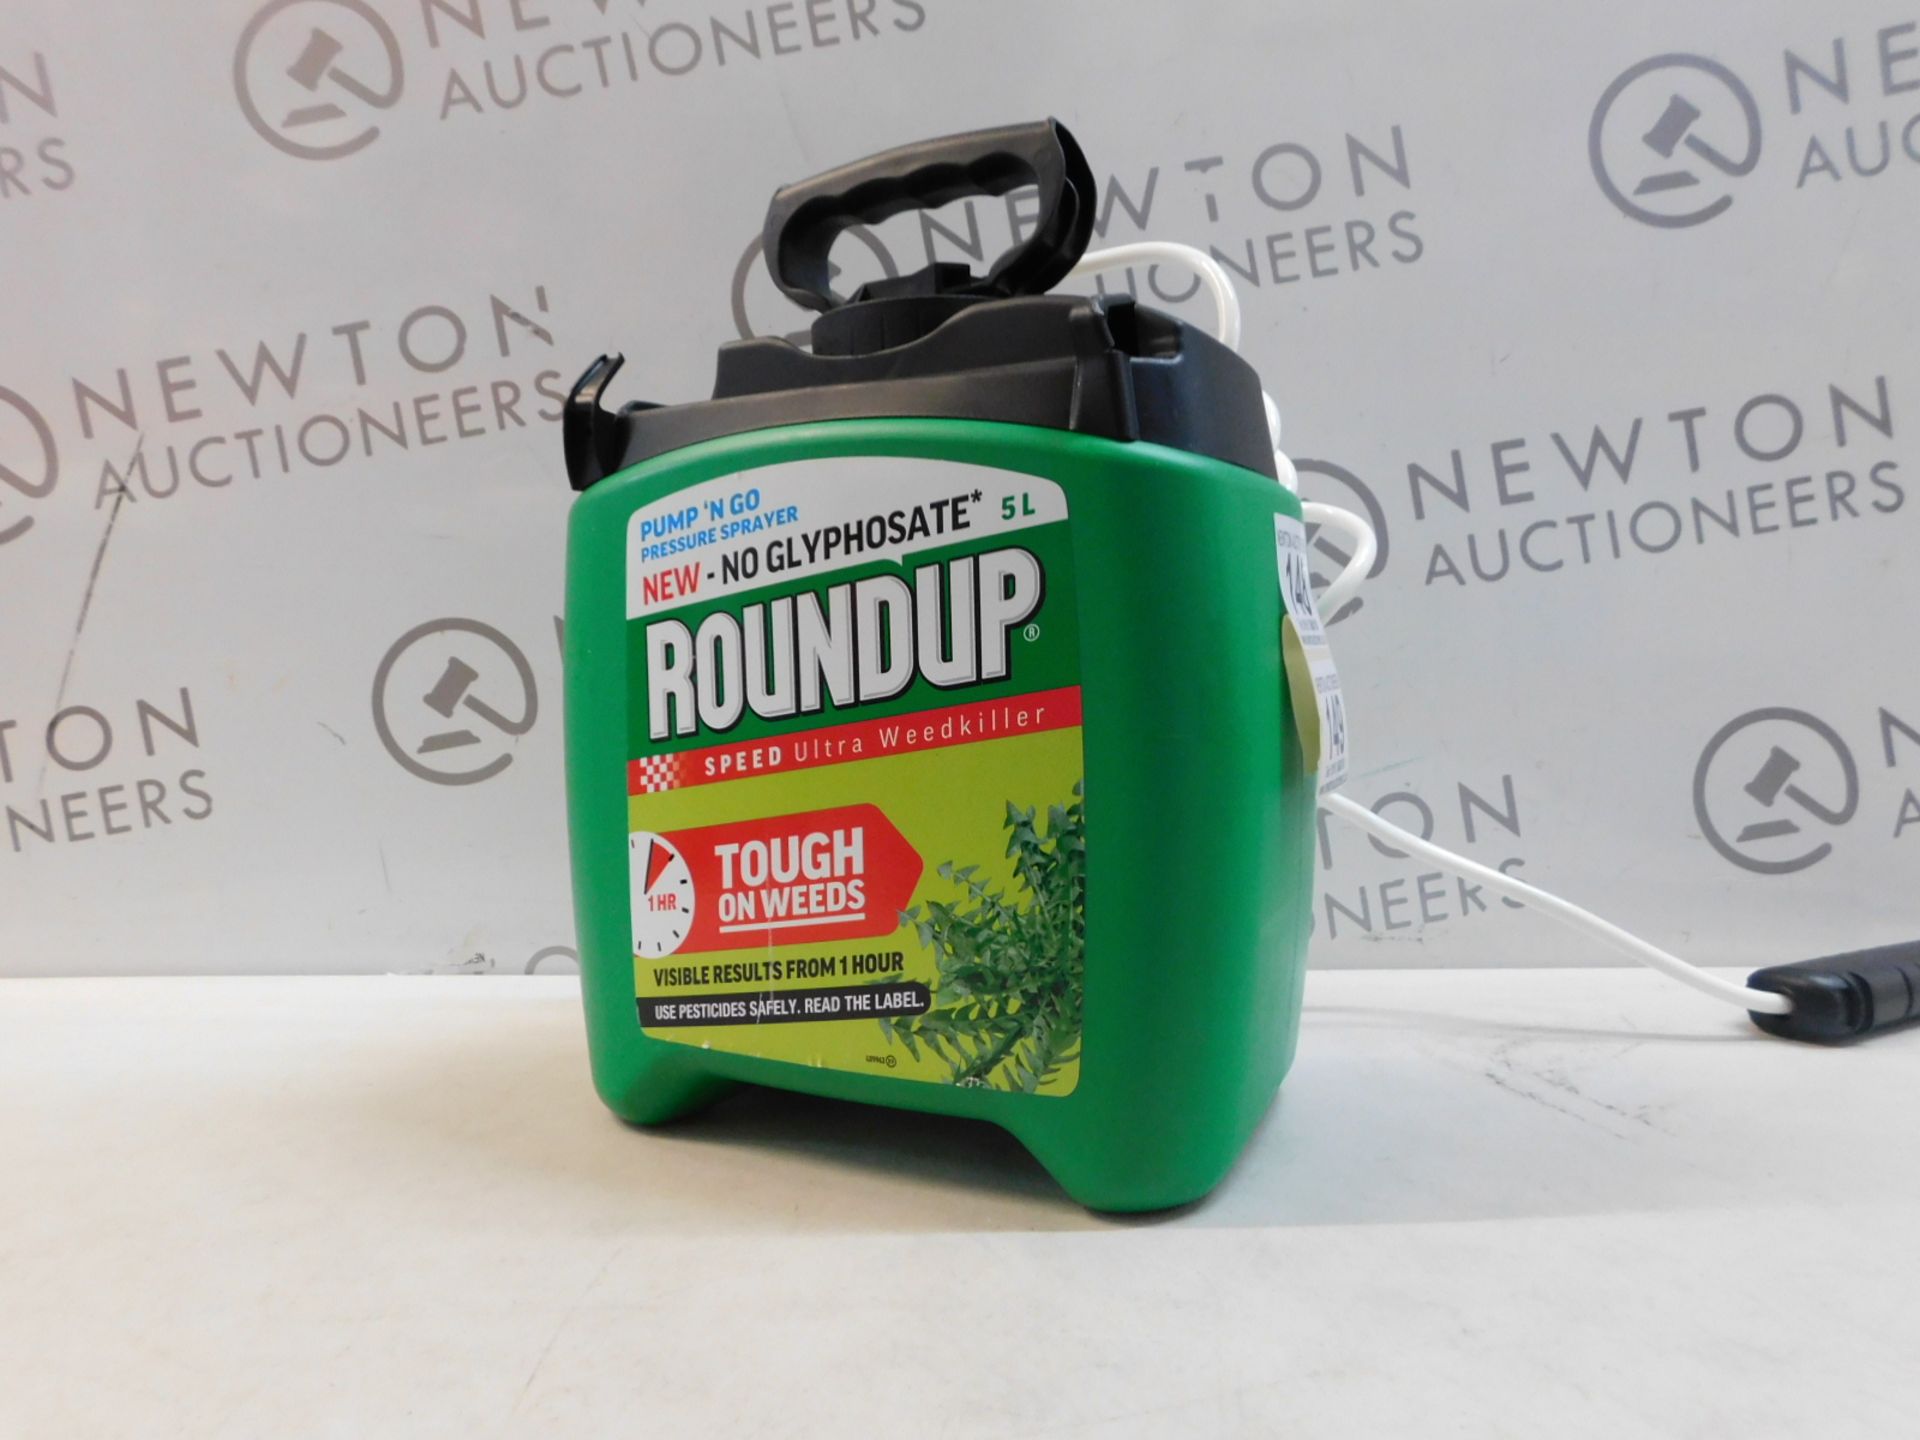 1 ROUND UP FAST ACTION PUMP 'N GO PRESSURE SPRAYER WEED KILLER 2L (APPROX) RRP Â£29.99